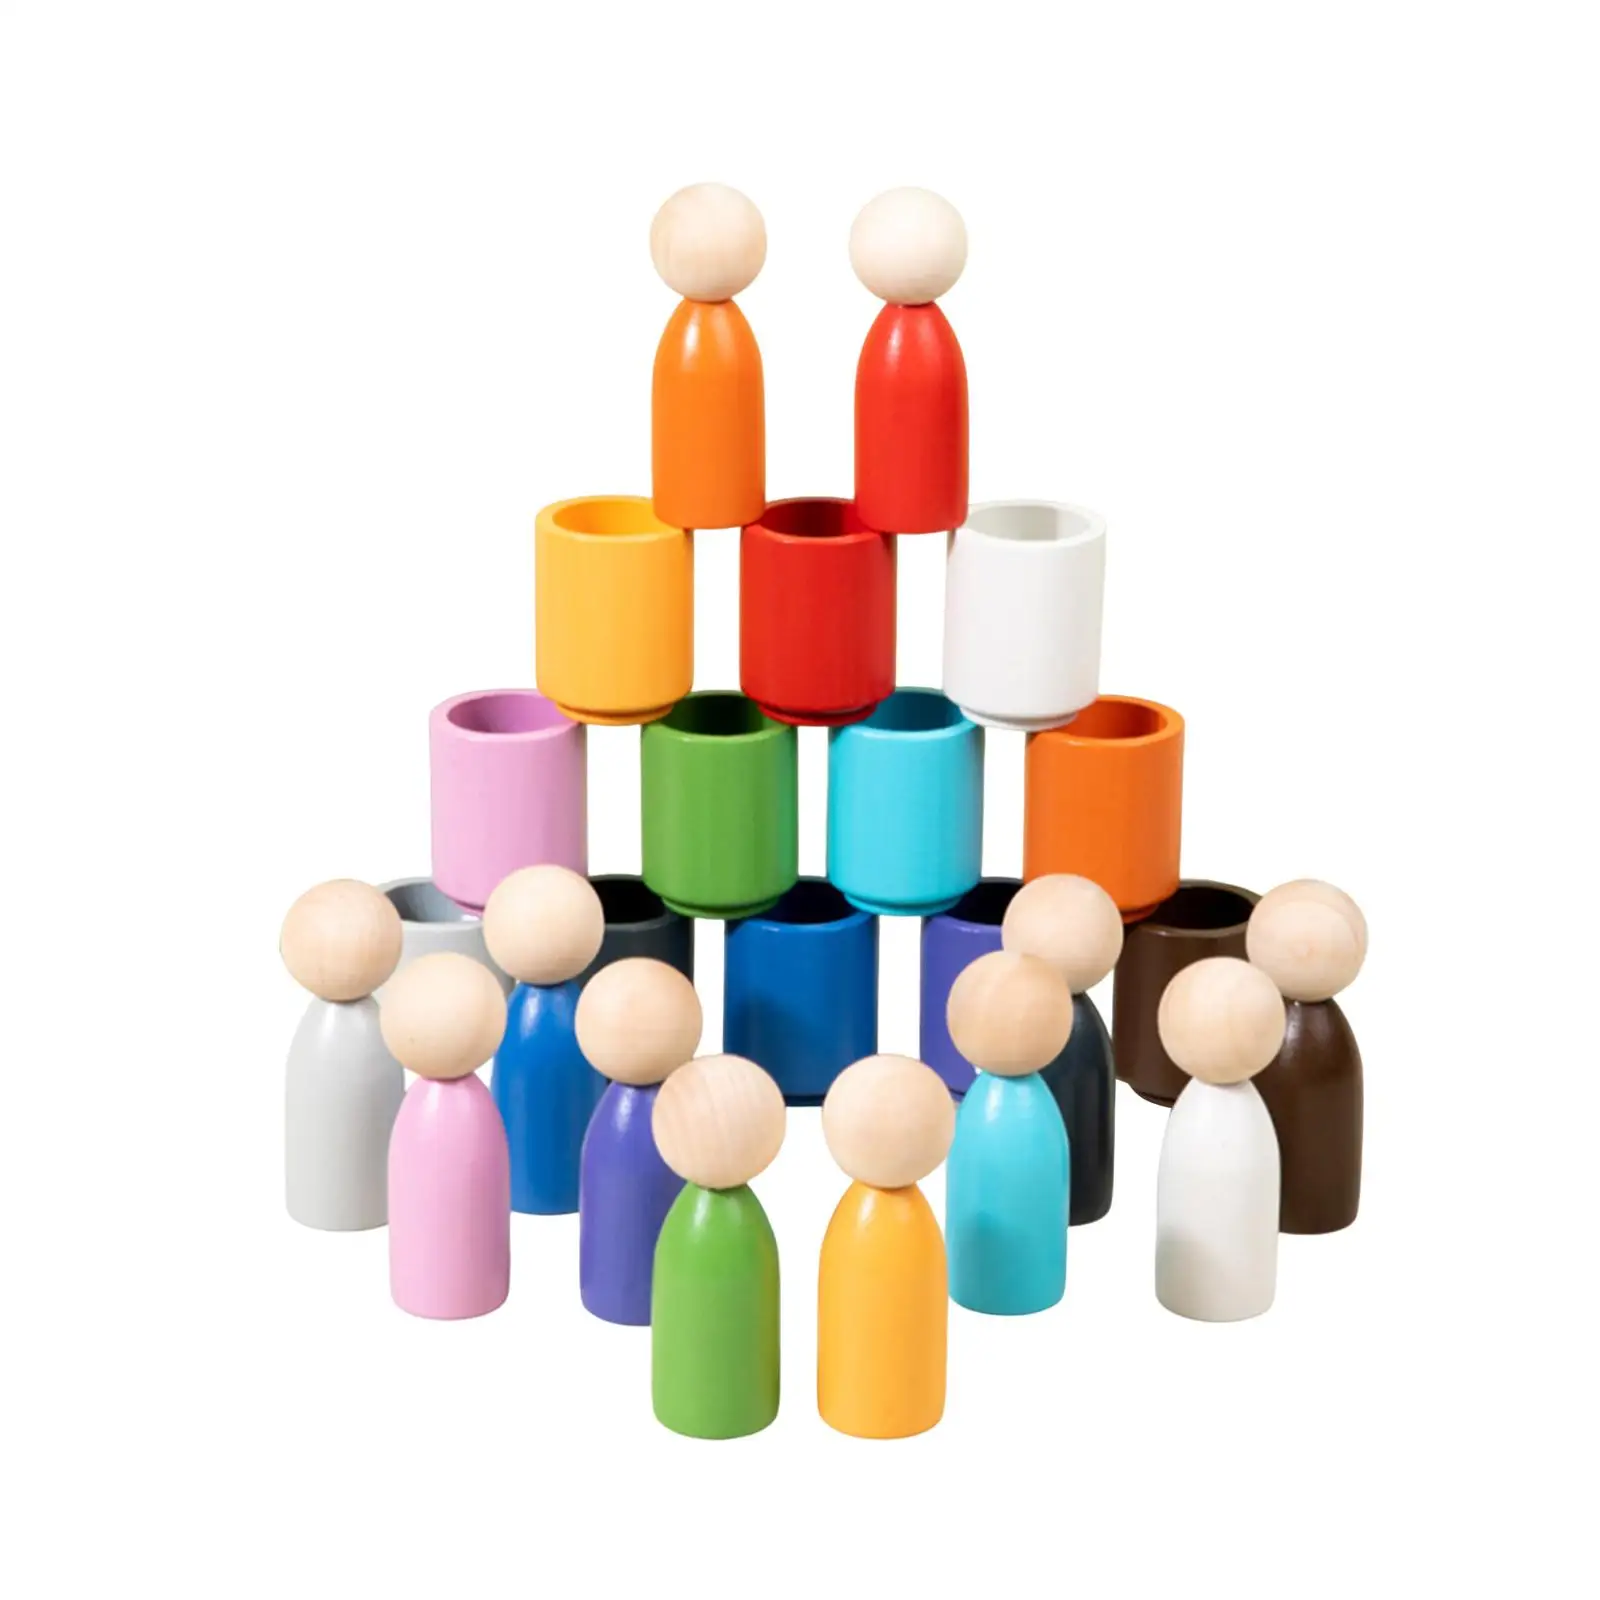 Color Sorting Peg Dolls Educational Toys with Cups and Balls Color Classification Wooden Sorter Game for Toddlers Girls Children